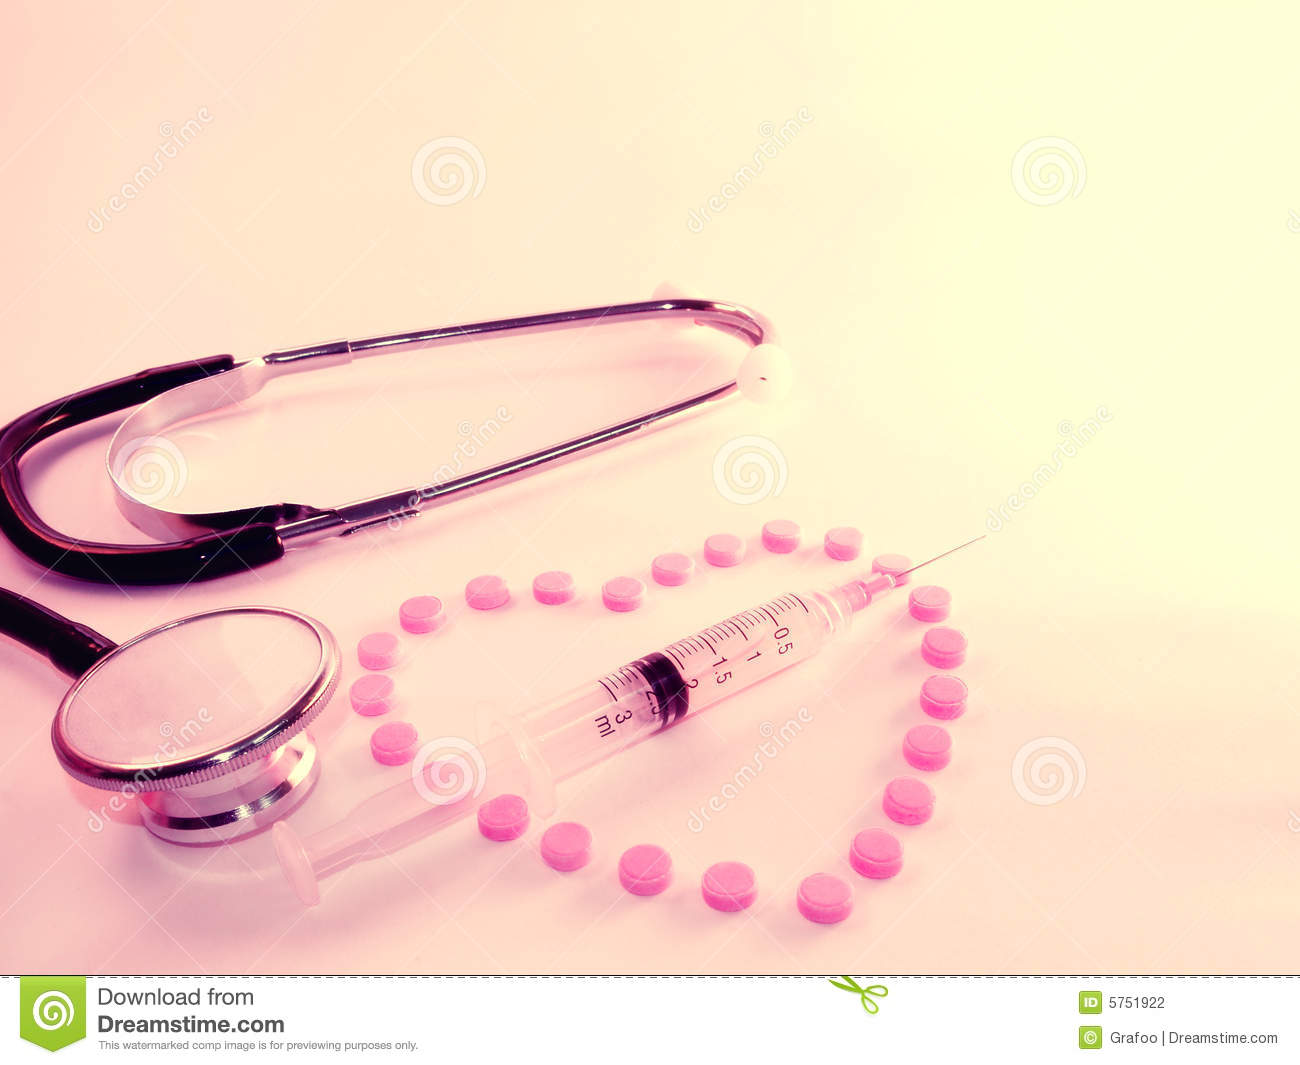 View Of Several Medical Related Items Including A Stethoscope A    